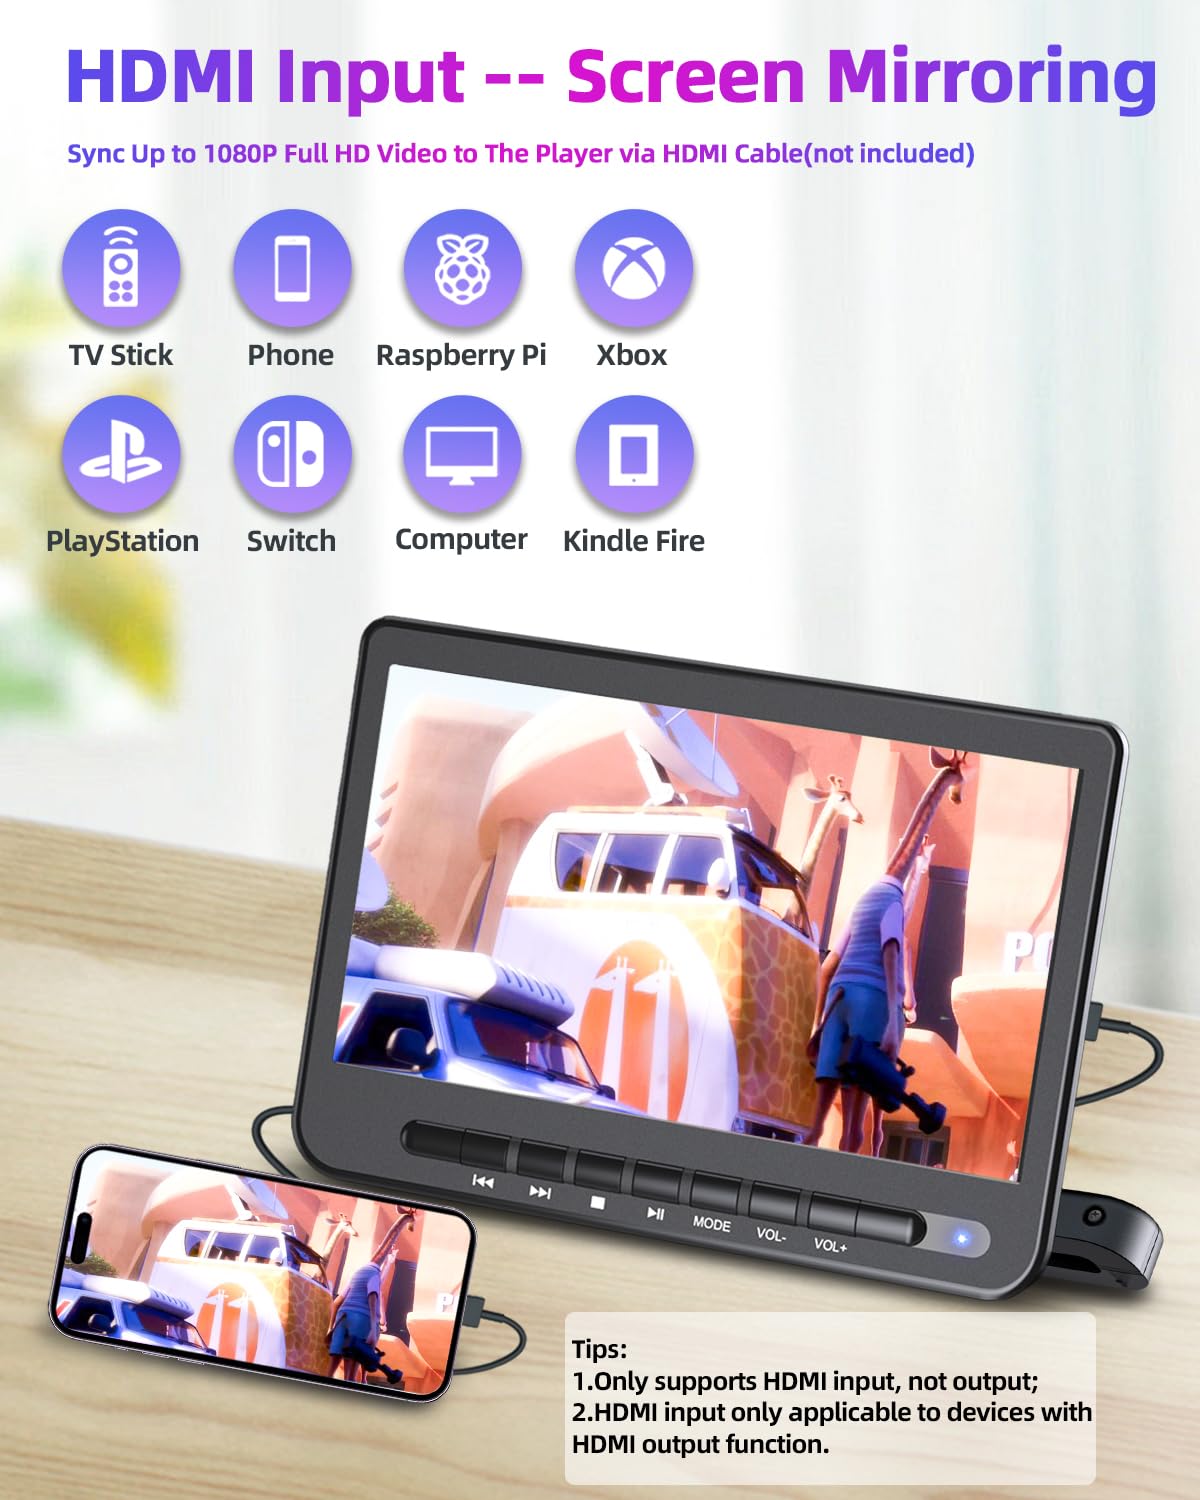 10.5" Portable DVD Player for Car with HDMI Input 1080P, DESOBRY Car DVD Player Dual Screen with Full HD Transmission,5-Hour Rechargeable Battery, Supports USB Input,Last Memory (1 Player + 1 Monitor)